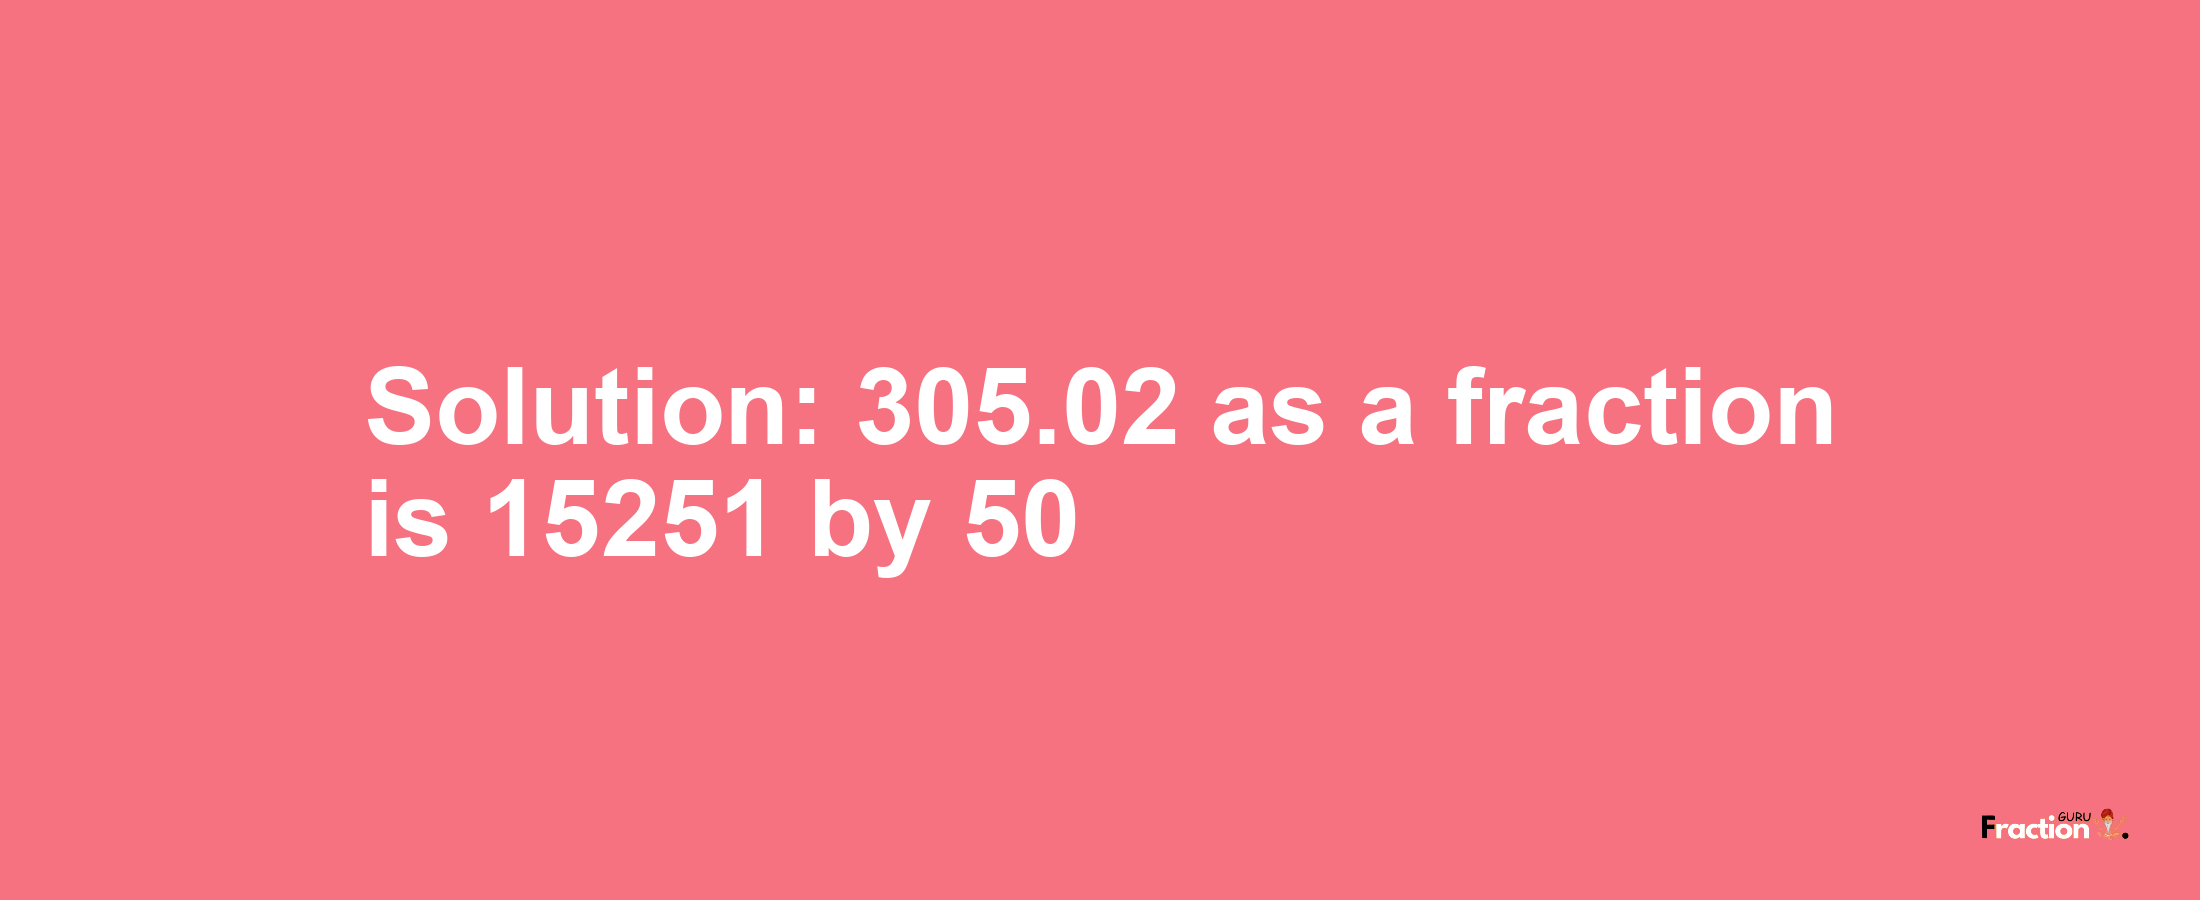 Solution:305.02 as a fraction is 15251/50